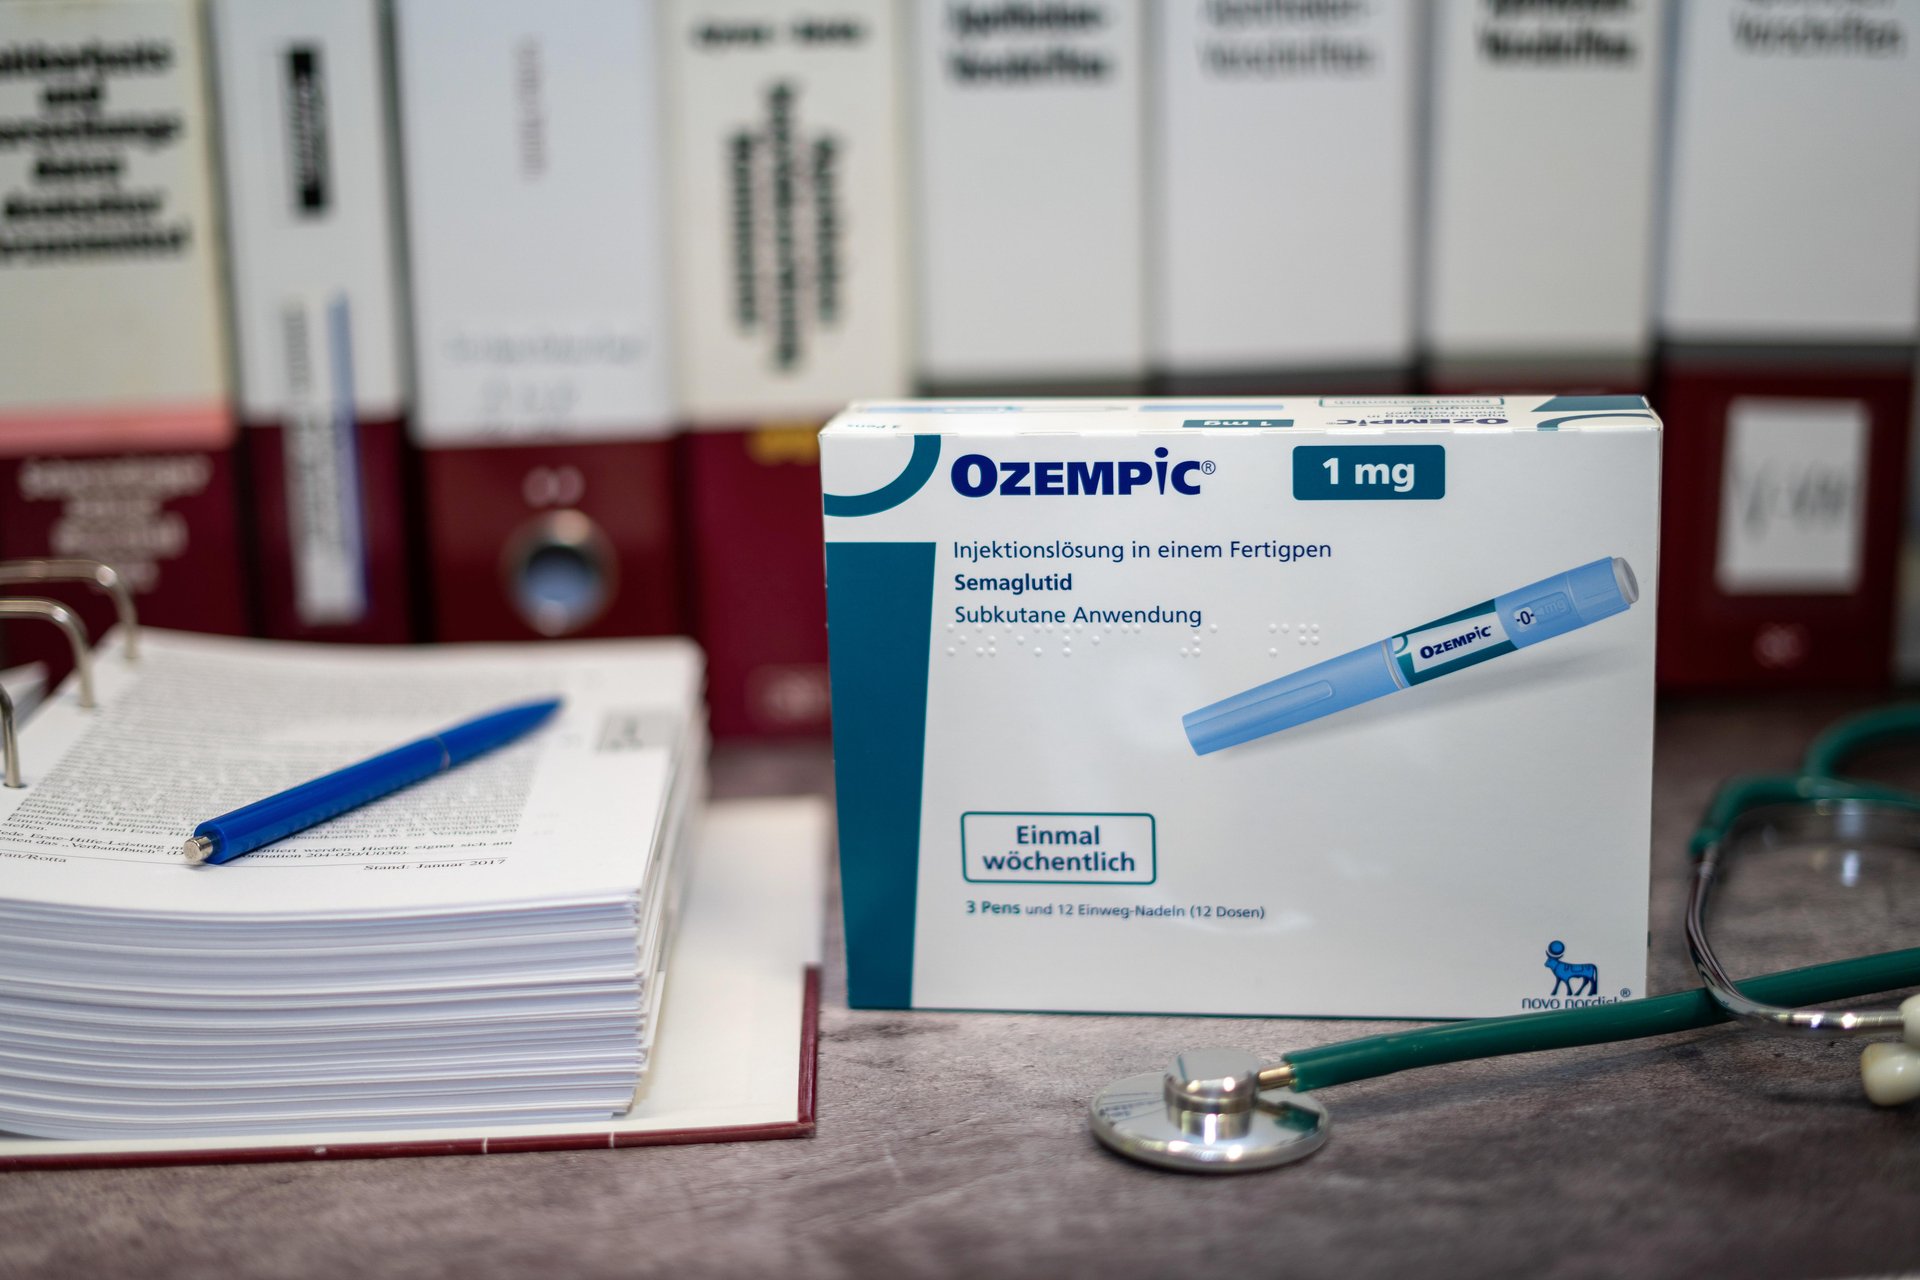 News Picture: In Small Study, Ozempic Helped People With Type 1 Diabetes Quit Insulin Treatments